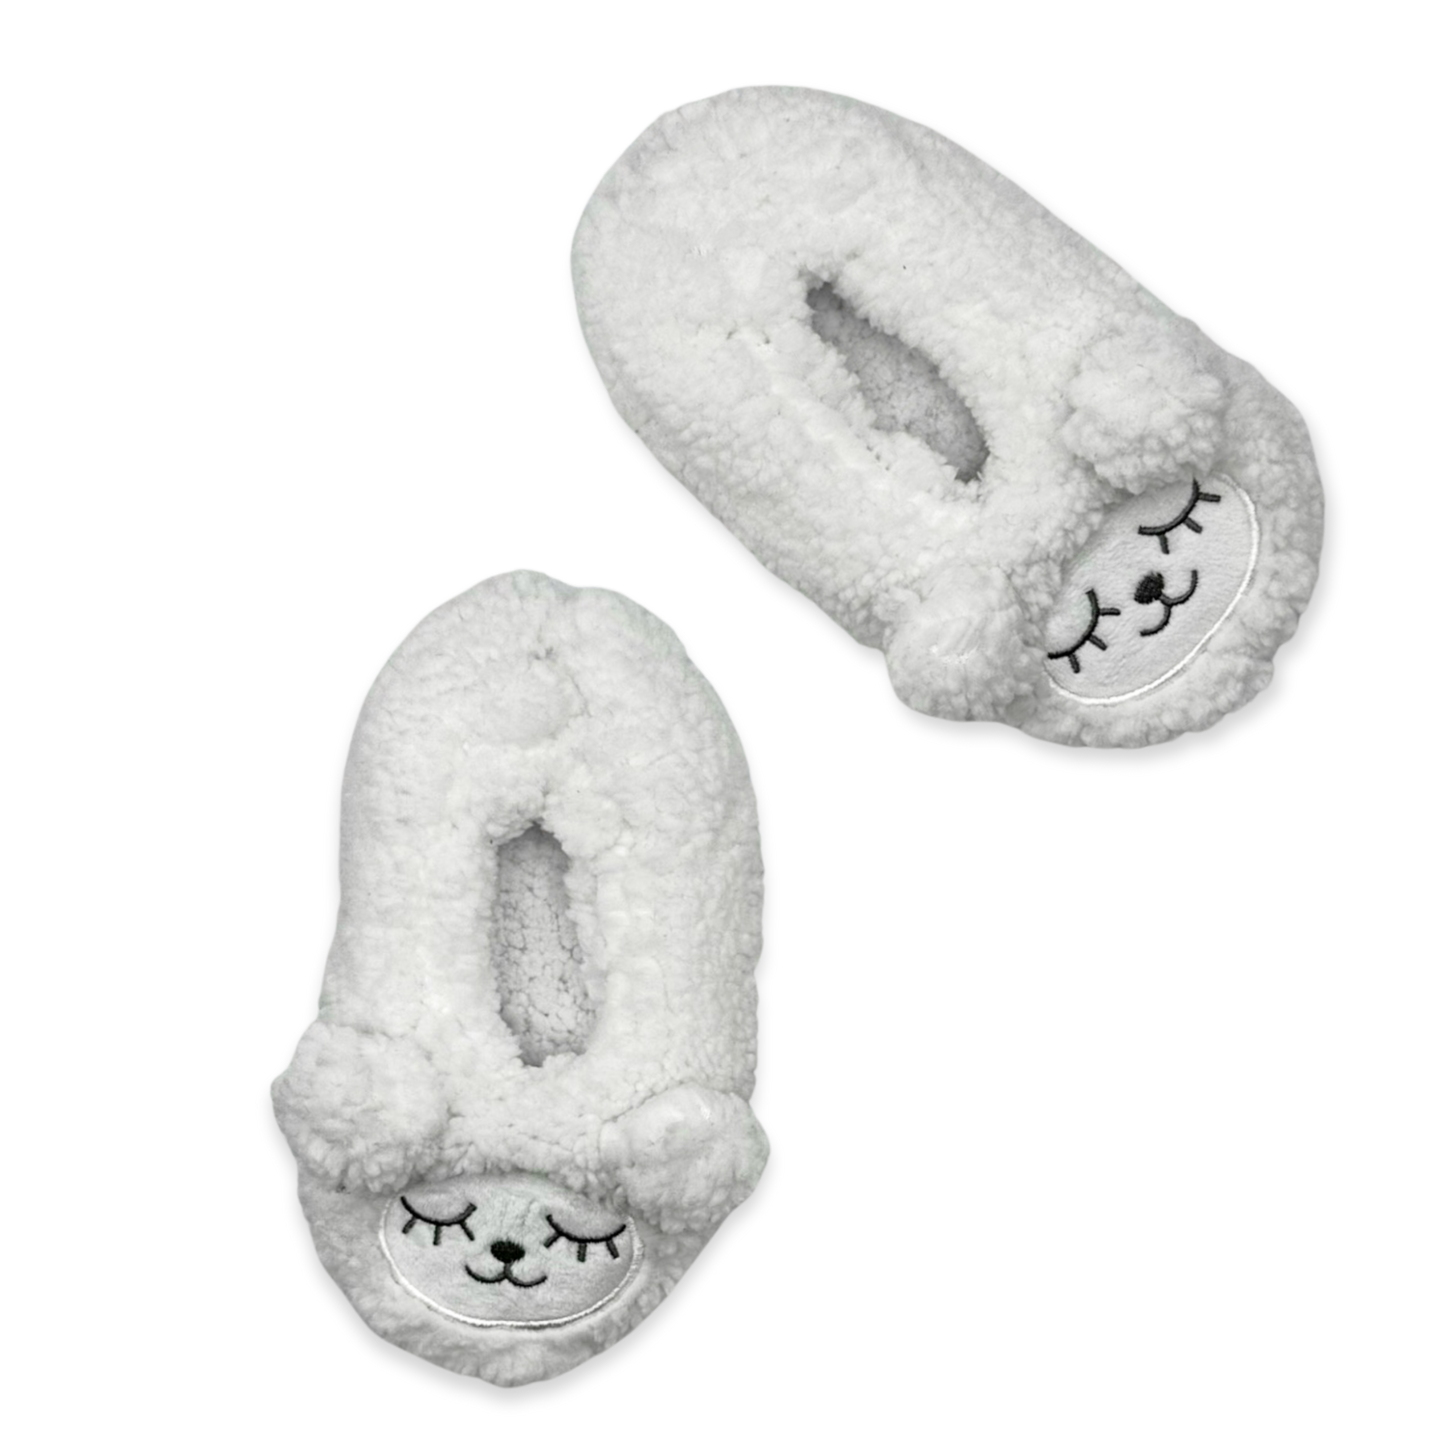  A pair of white slippers with a sheep face on them